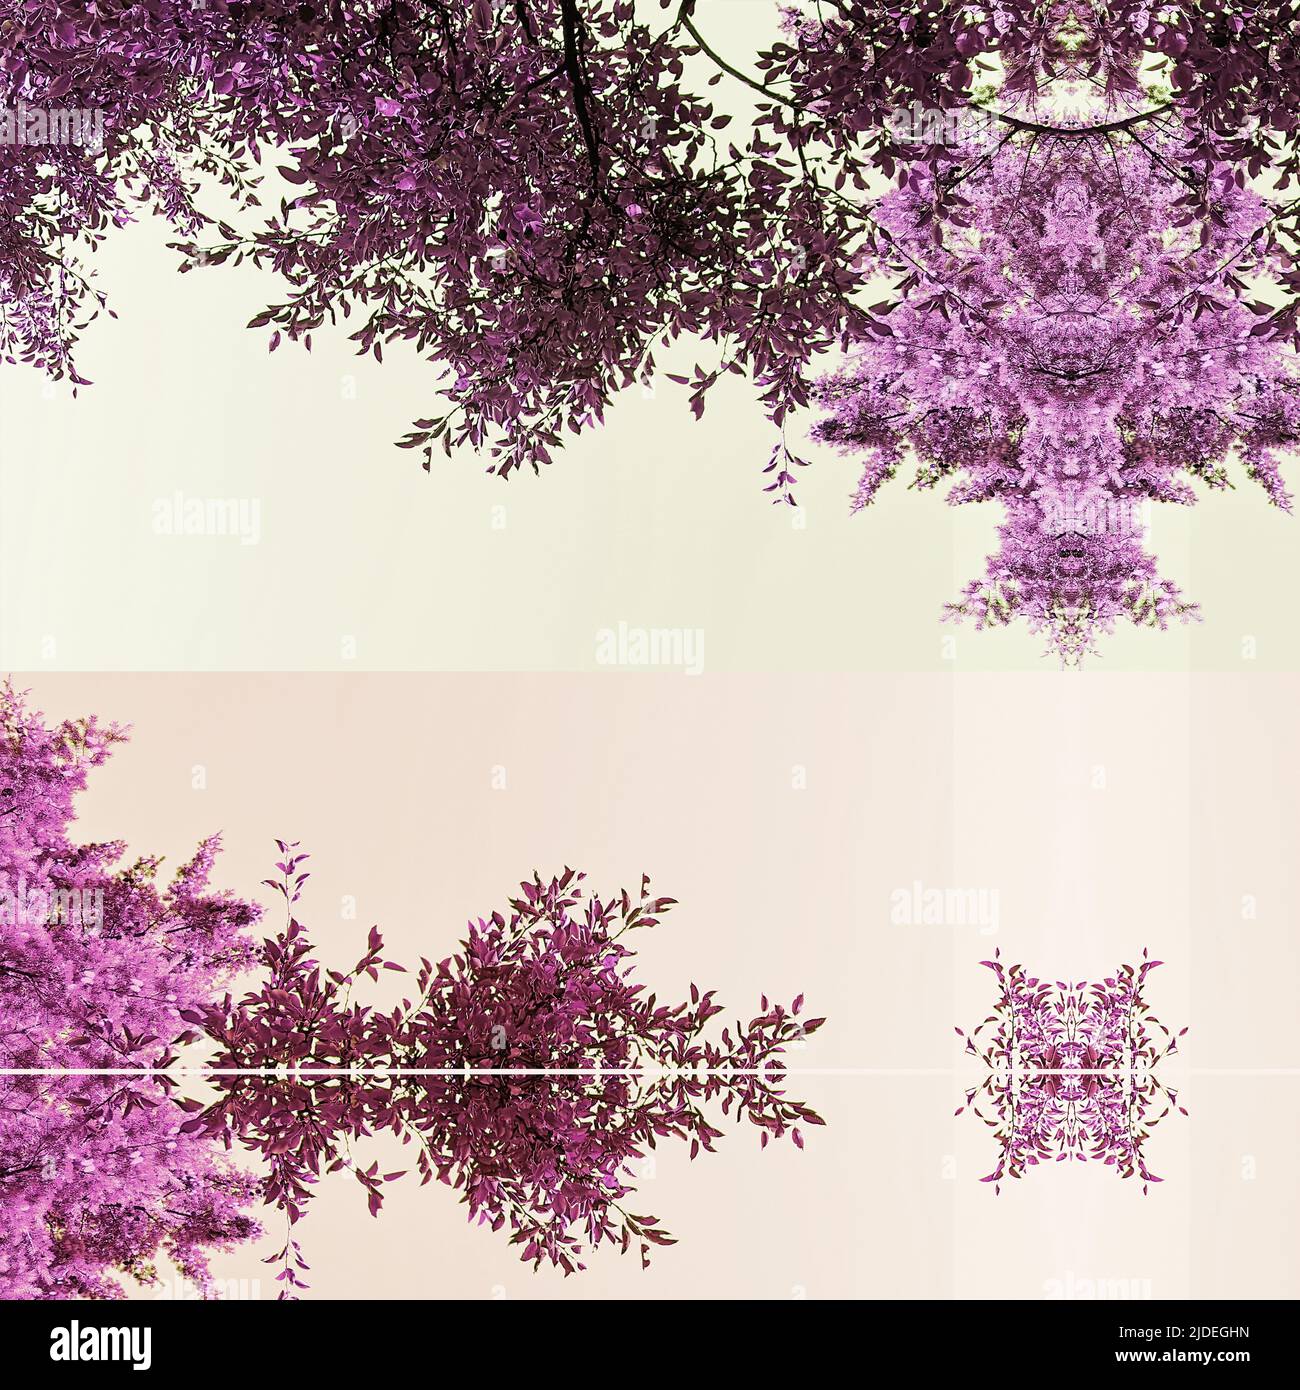 Summer cherry trees in bloom, a photo collage of treetops in purple pink colors, artistic nature background. Stock Photo